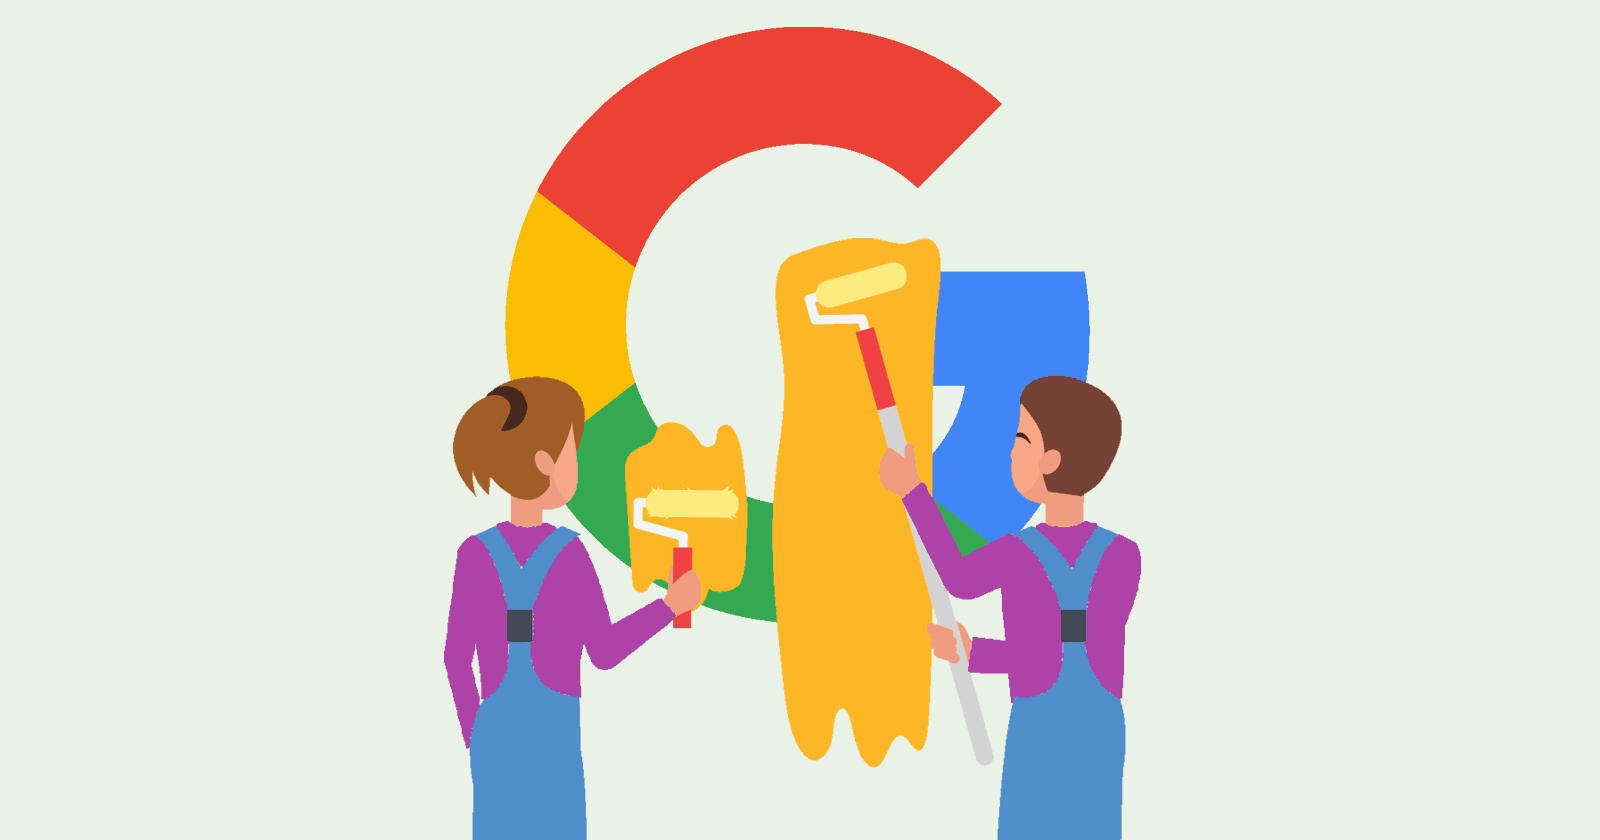 Image of home services professionals painting over Google's multi-color G logo.